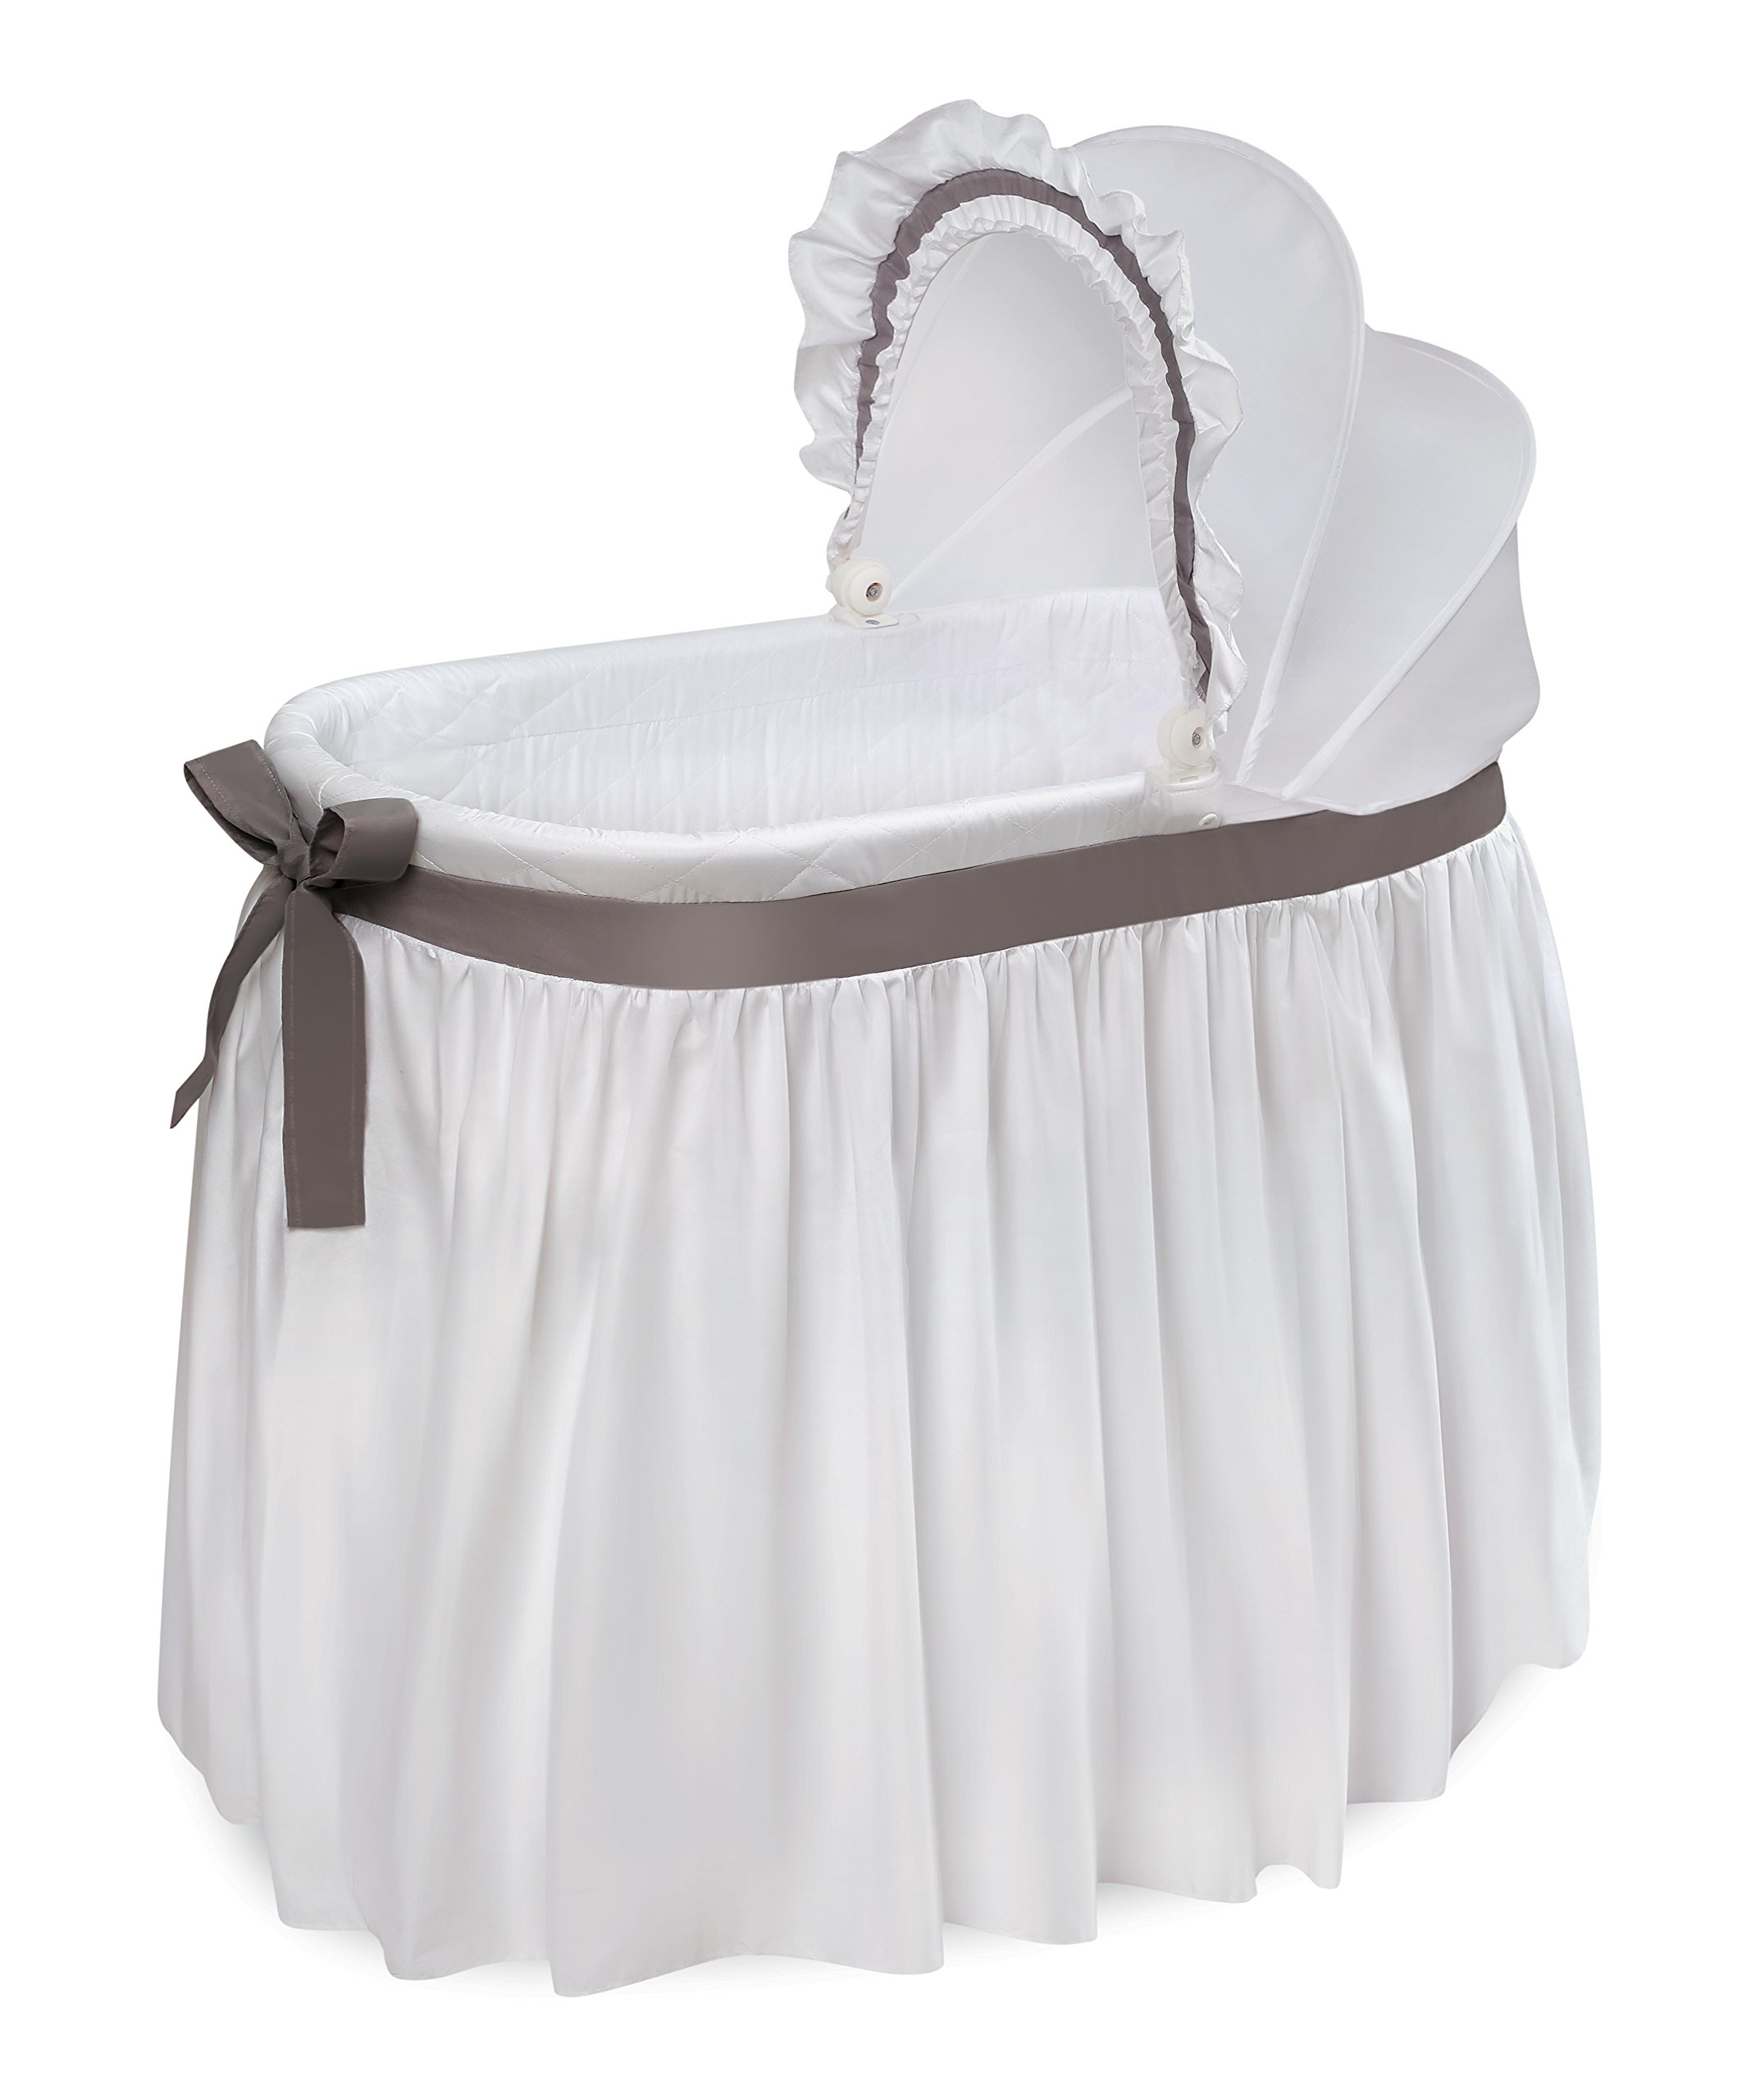 Badger Basket Wishes Rocking Baby Bassinet and Bedside Sleeper with Bedding, Pad, and Storage Basket - White/Gray